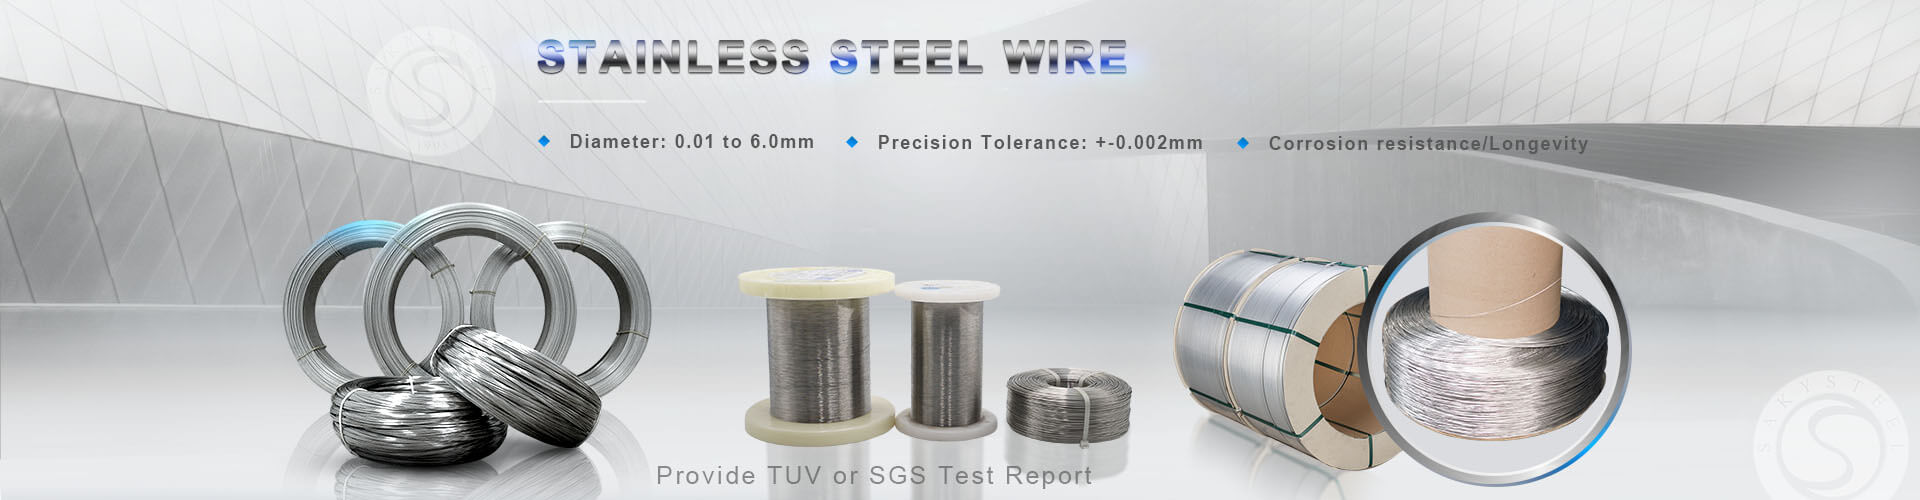 Stainless Steel Wires From SakySteel   2.0